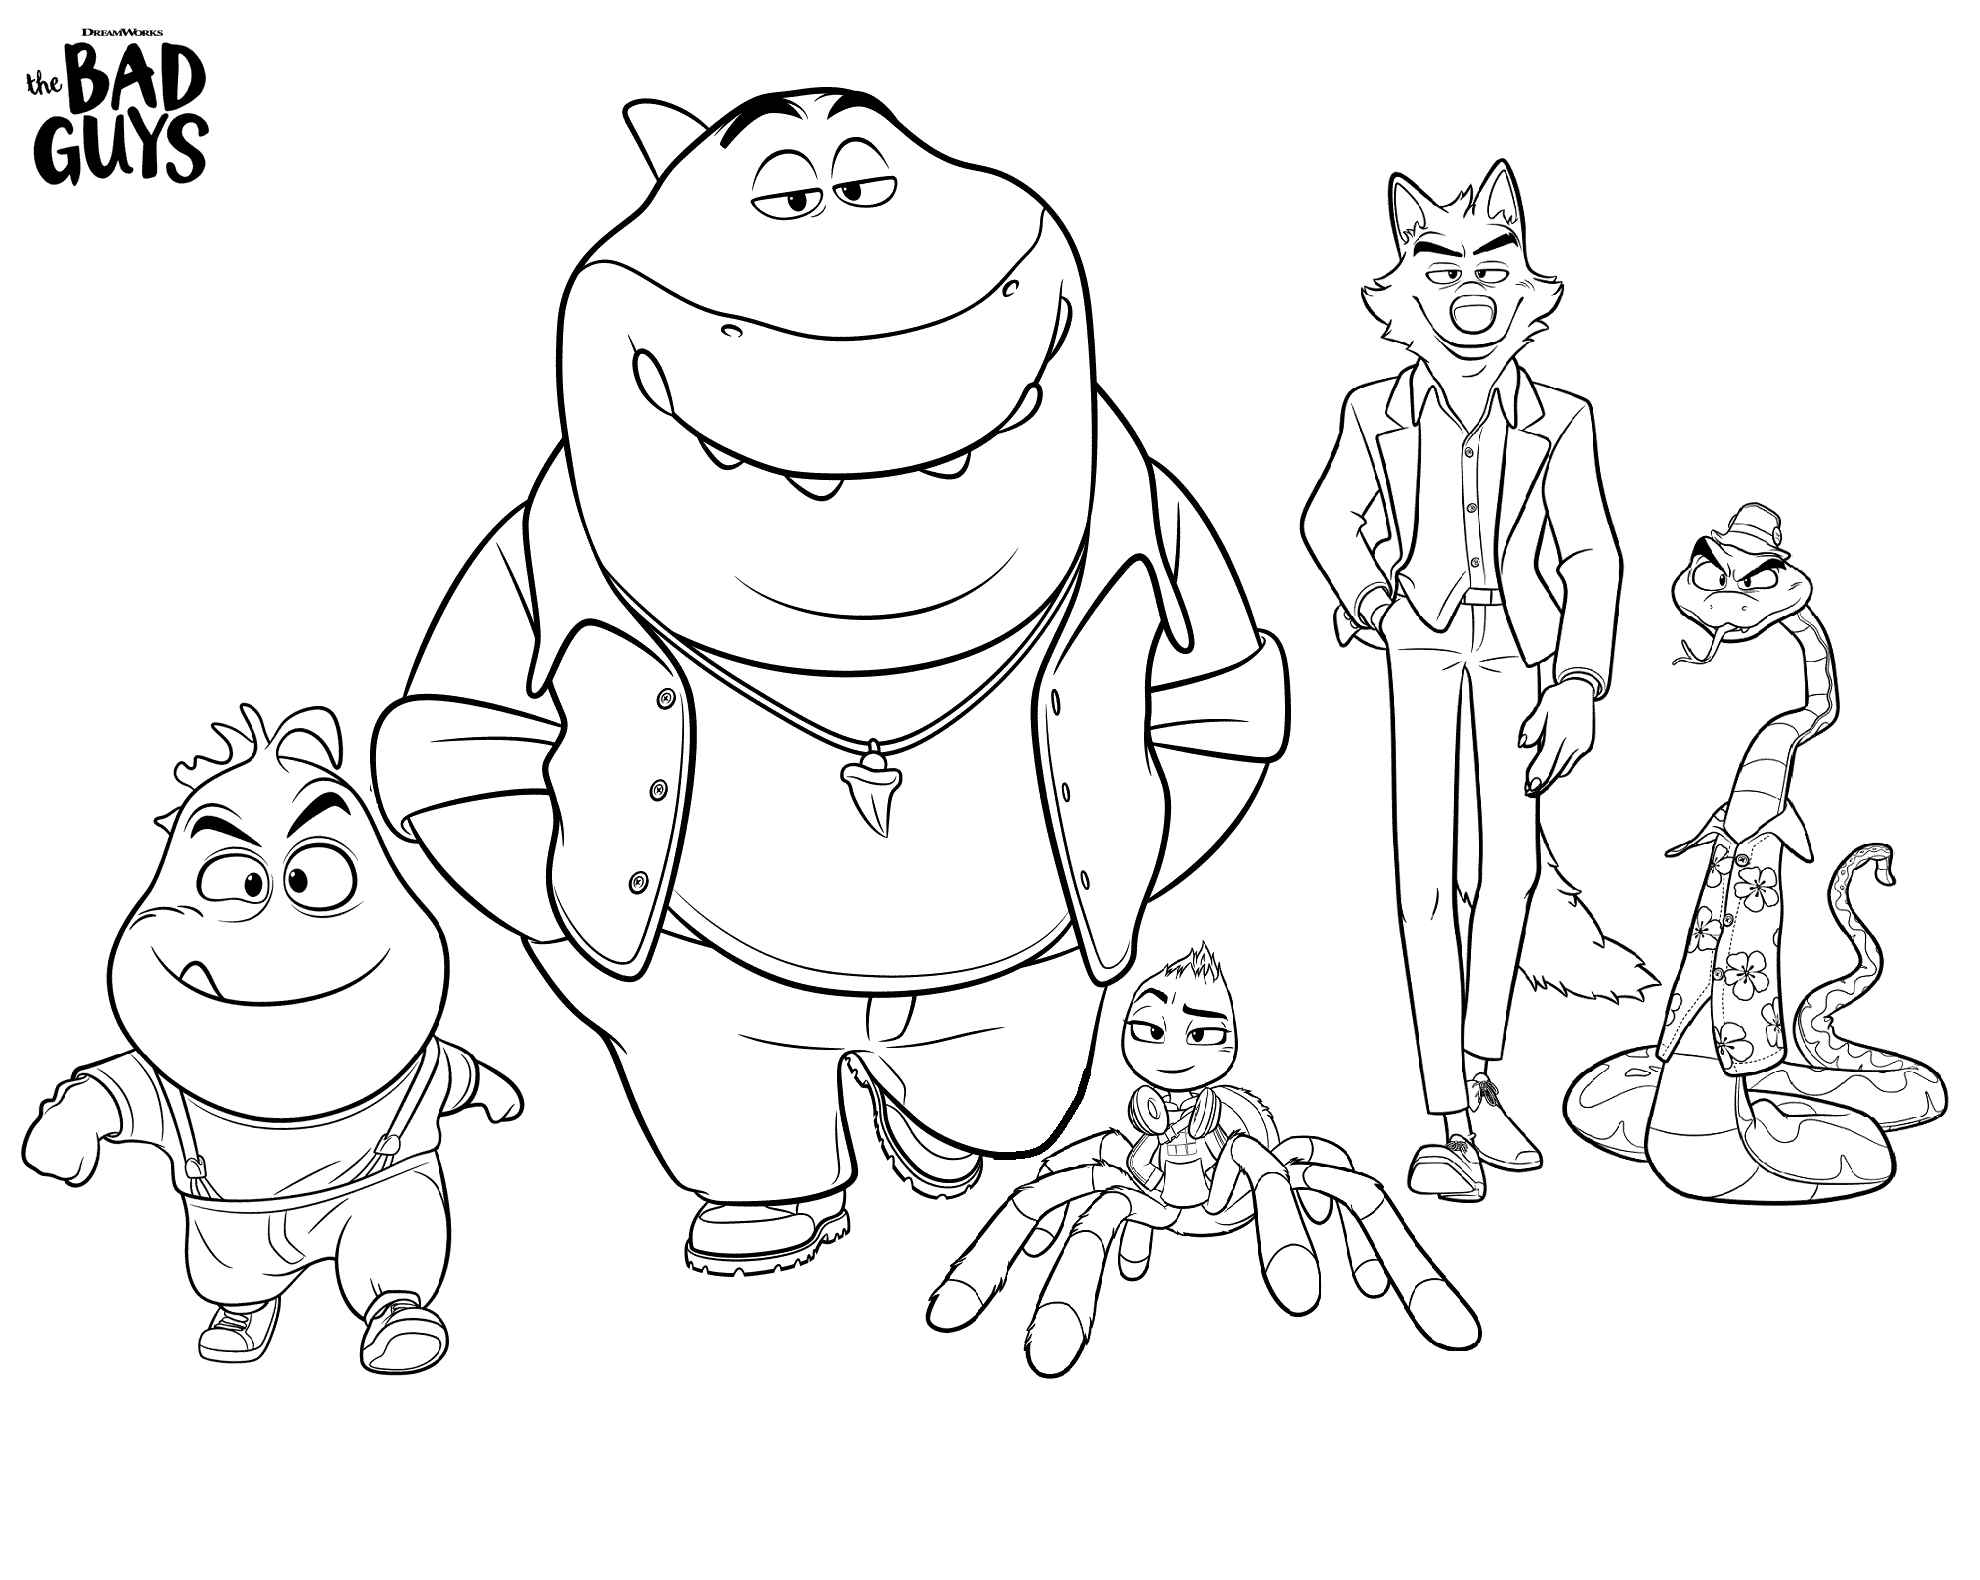 The Bad Guys Gang Coloring Page